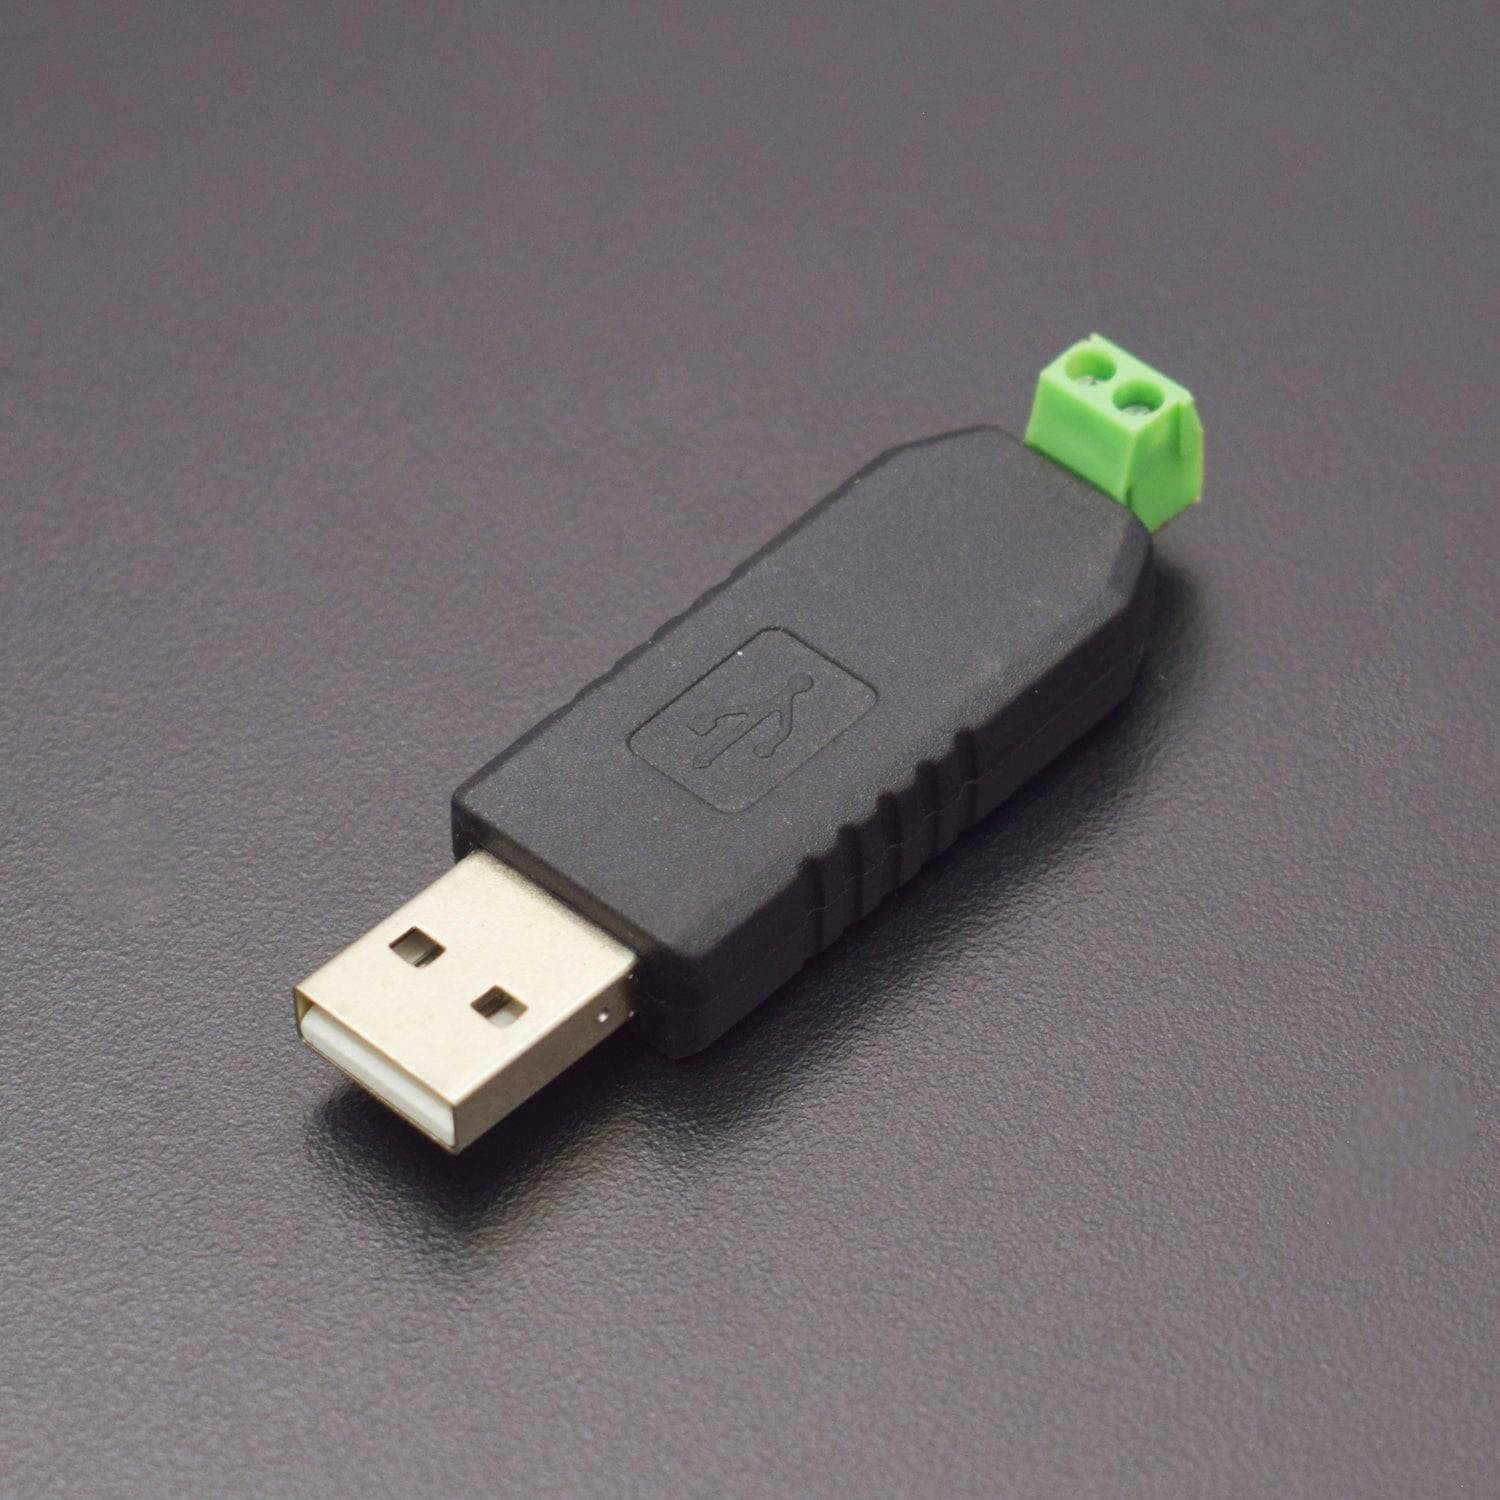 USB To RS485 USB-485 Converter CH340 Chip Adapter Support  Win7/ME/2000/XP/Vista - NA055